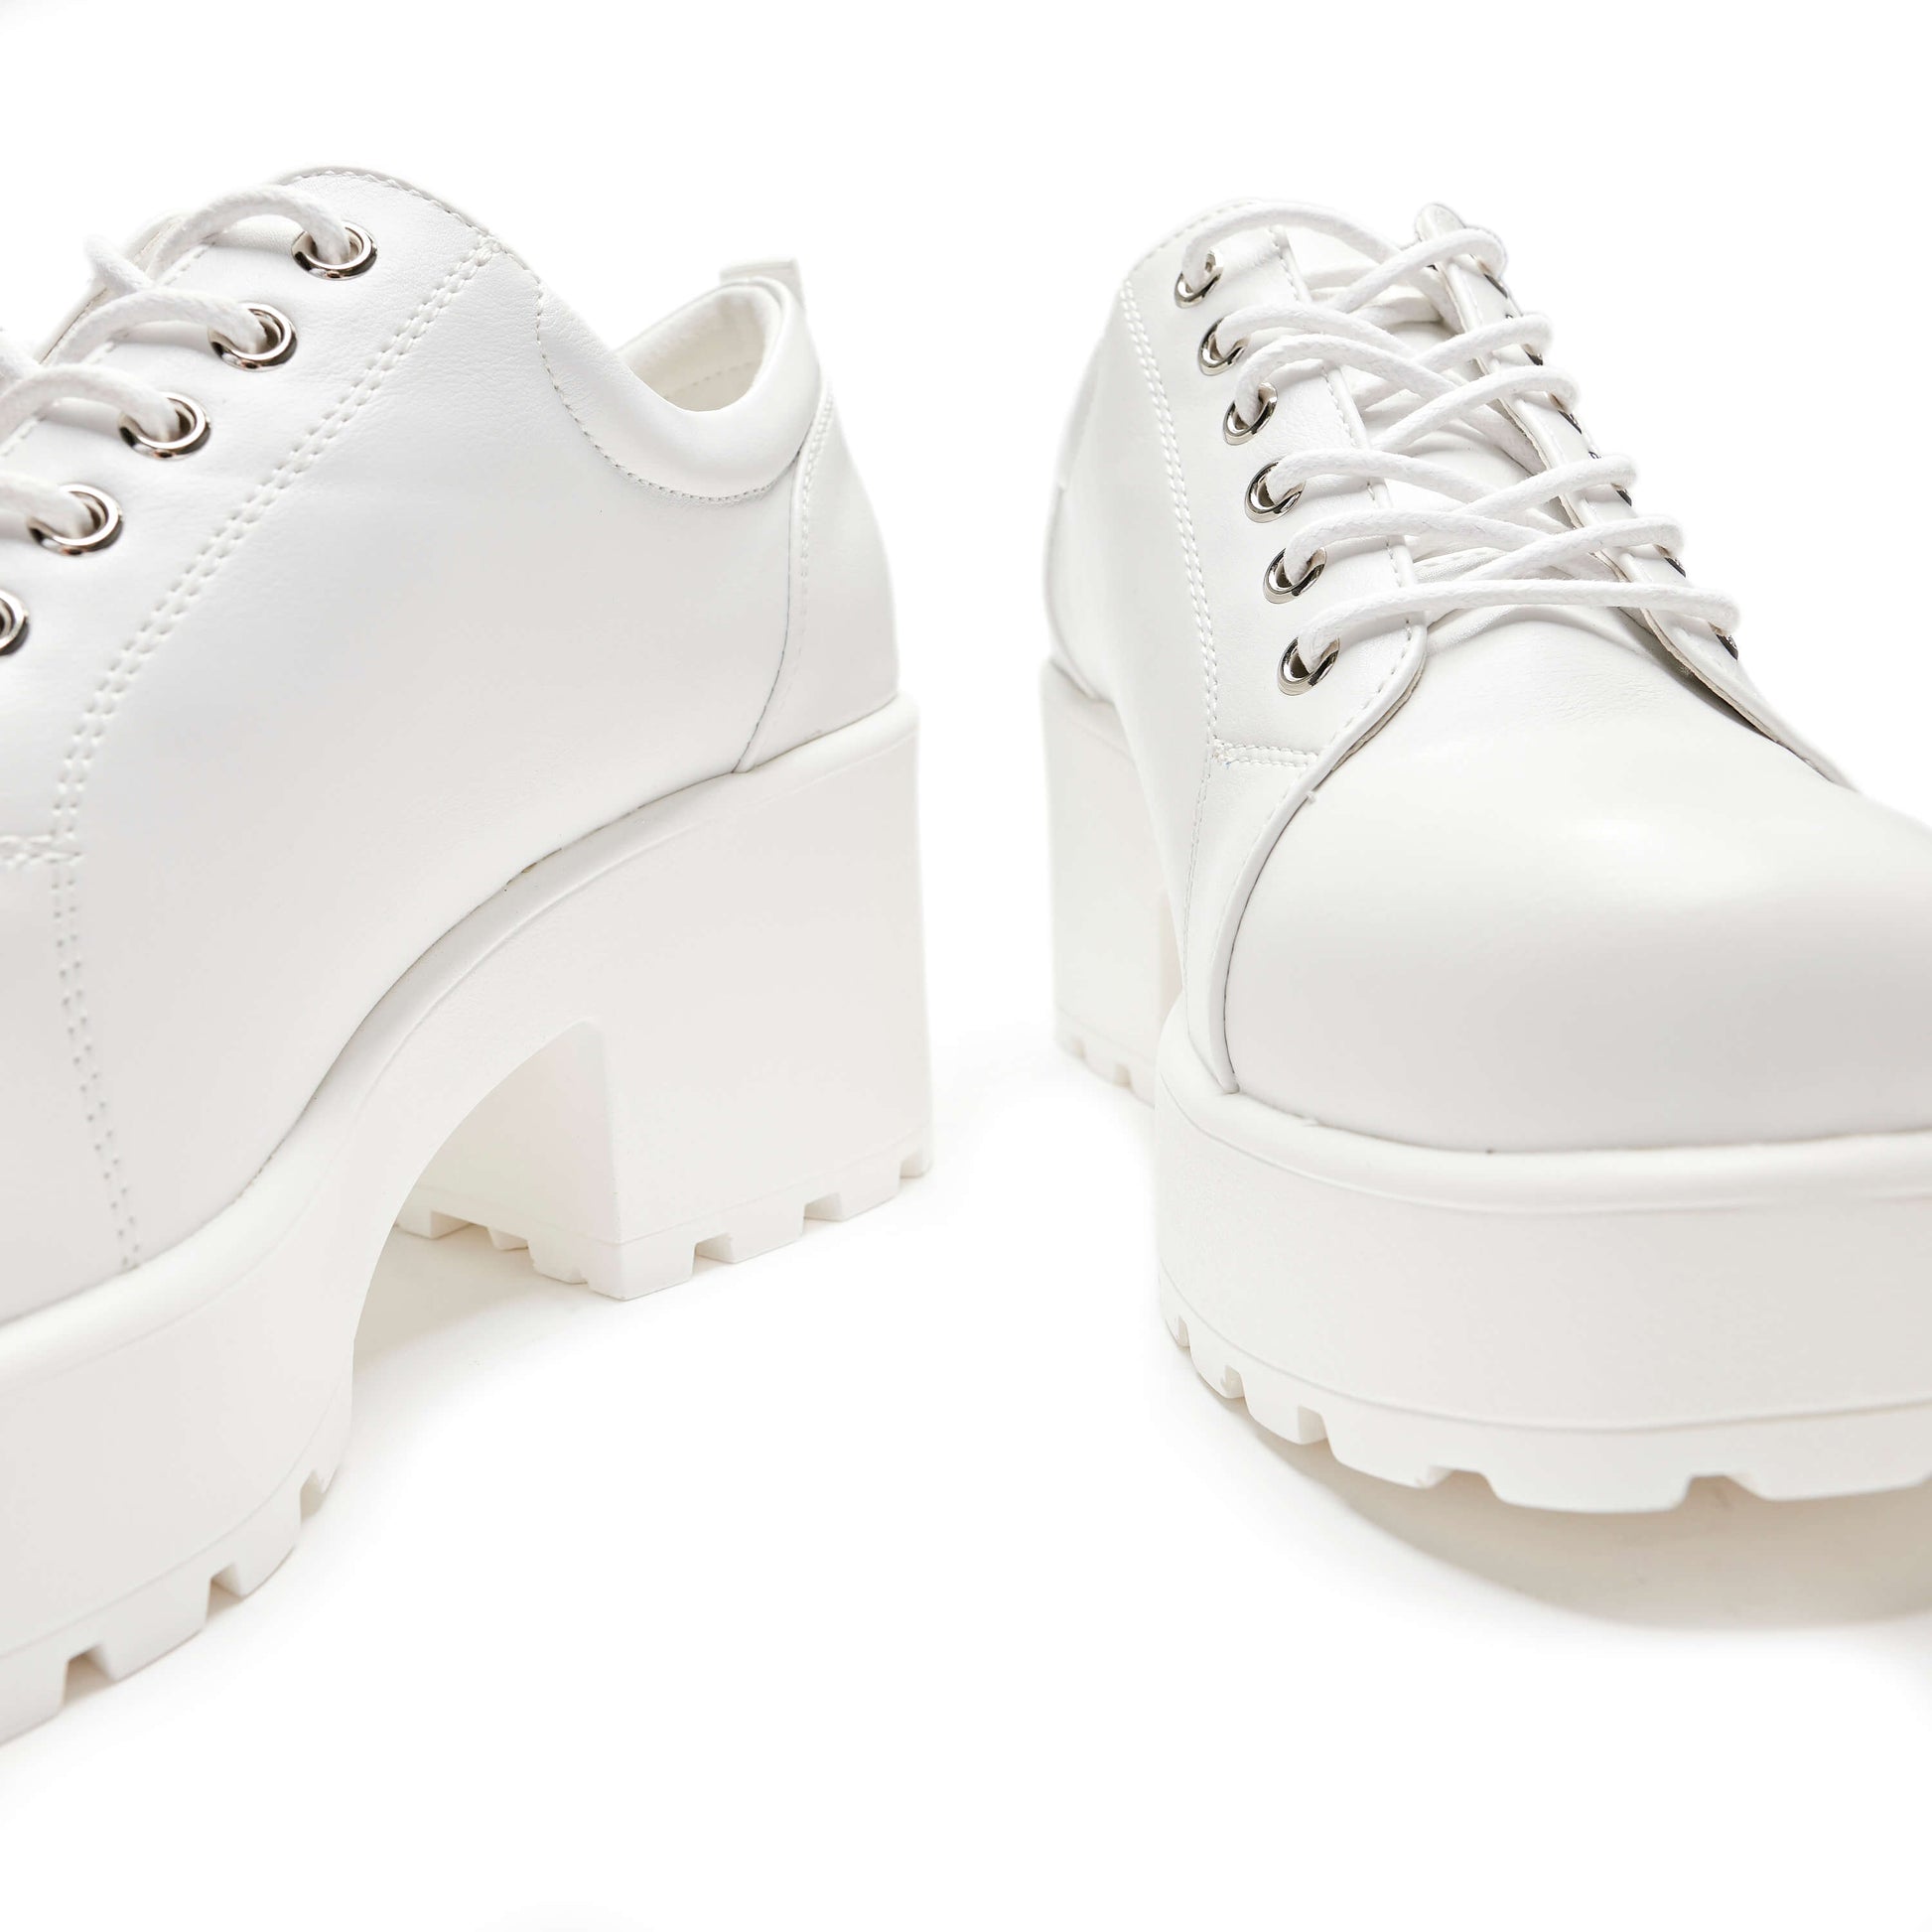 Rei Reloaded White Chunky Shoes - Shoes - KOI Footwear - White - Front Detail